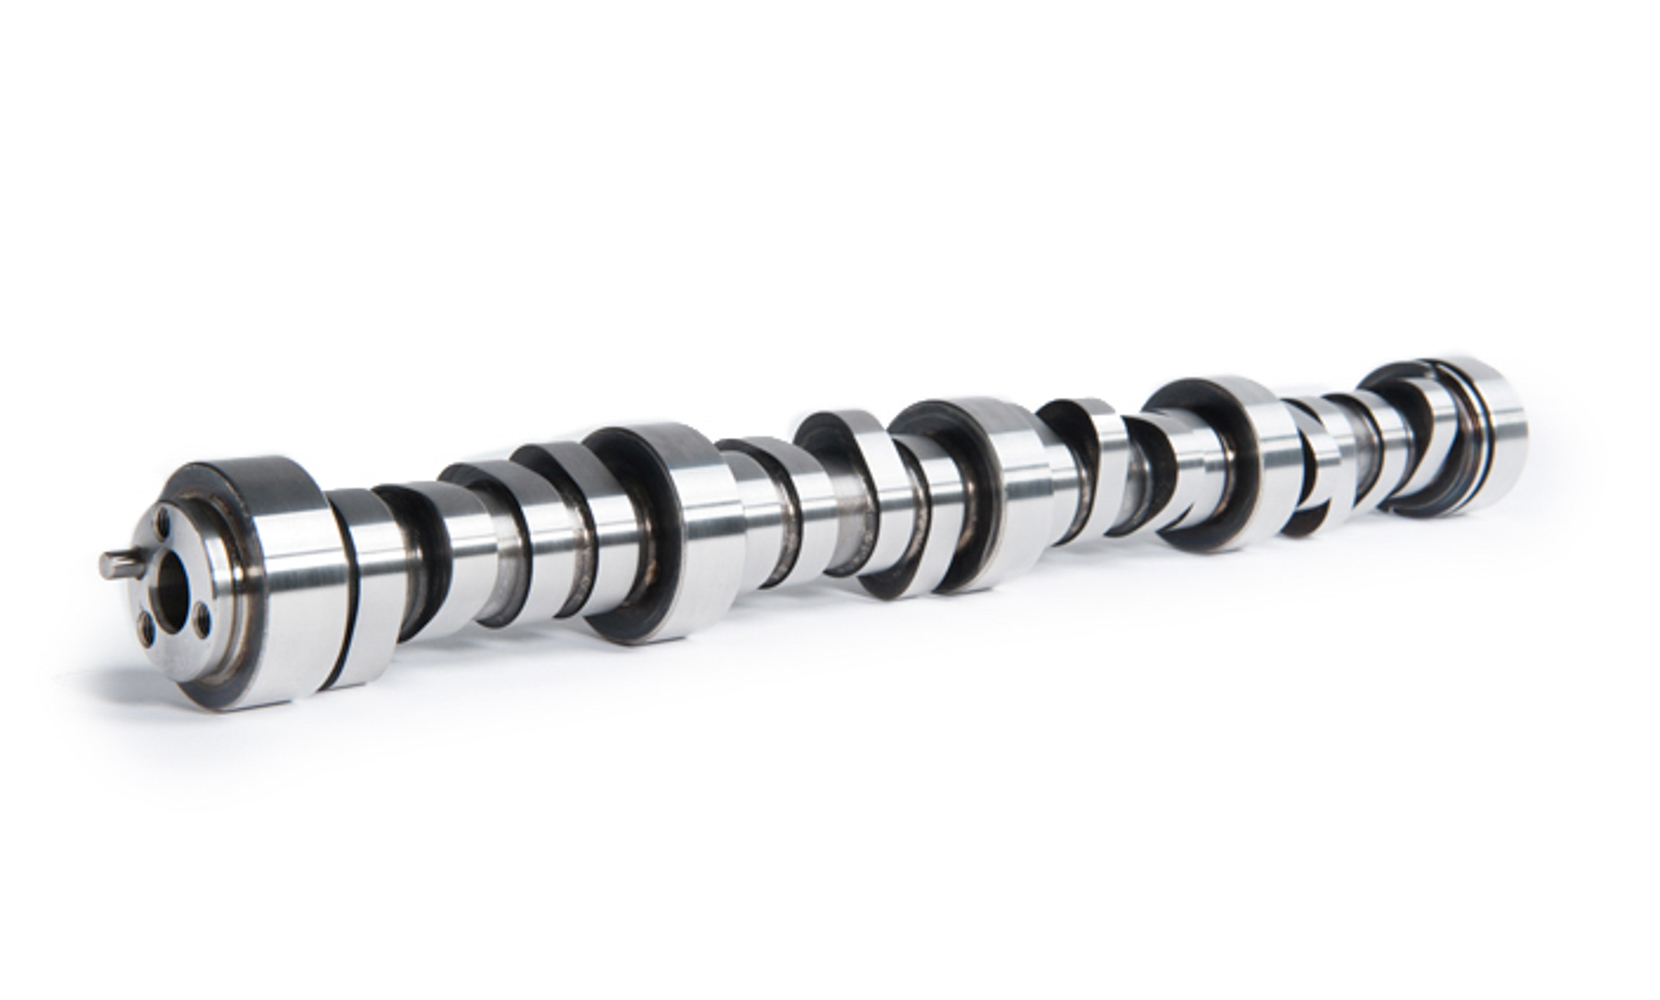 Cam Motion 03-01-0027 Camshaft, Stage 2, Hydraulic Roller, Lift 0.501 / 0.501 in, Duration 206 / 210, 115 LSA, 2500 / 5700 RPM, GM LS-Series, Each